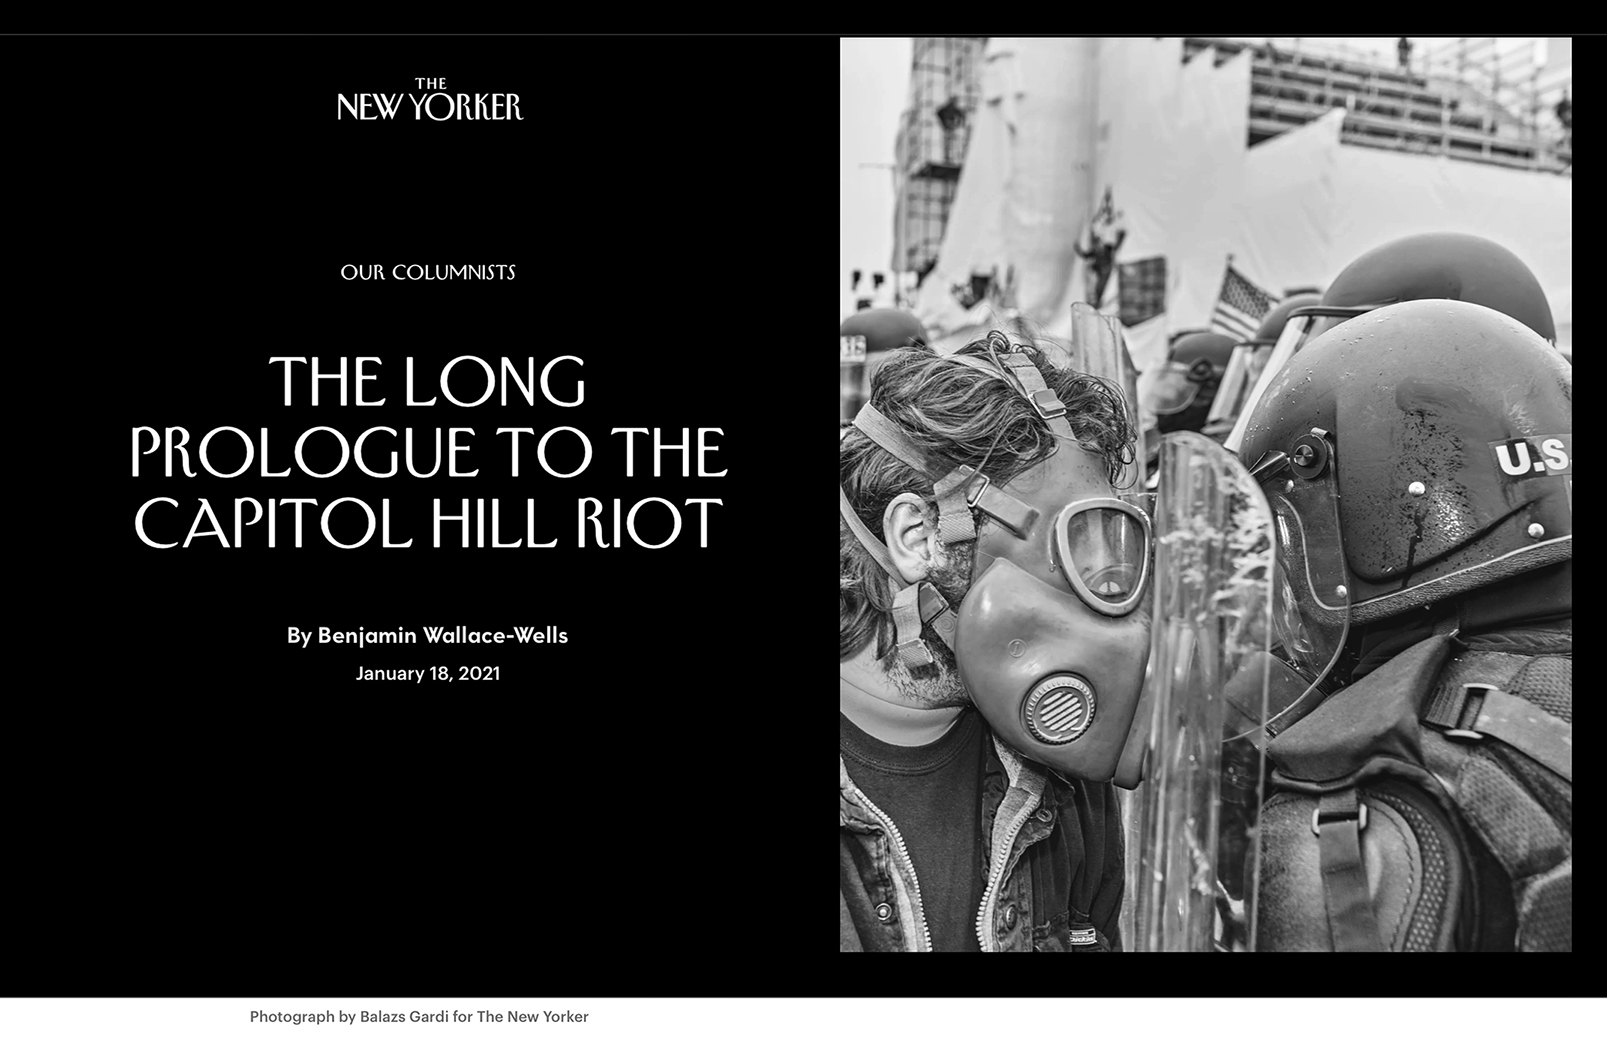 "The Long Prologue to the Capitol Hill Riot," photograph by Balazs Gardi, January 18 at newyorker.com